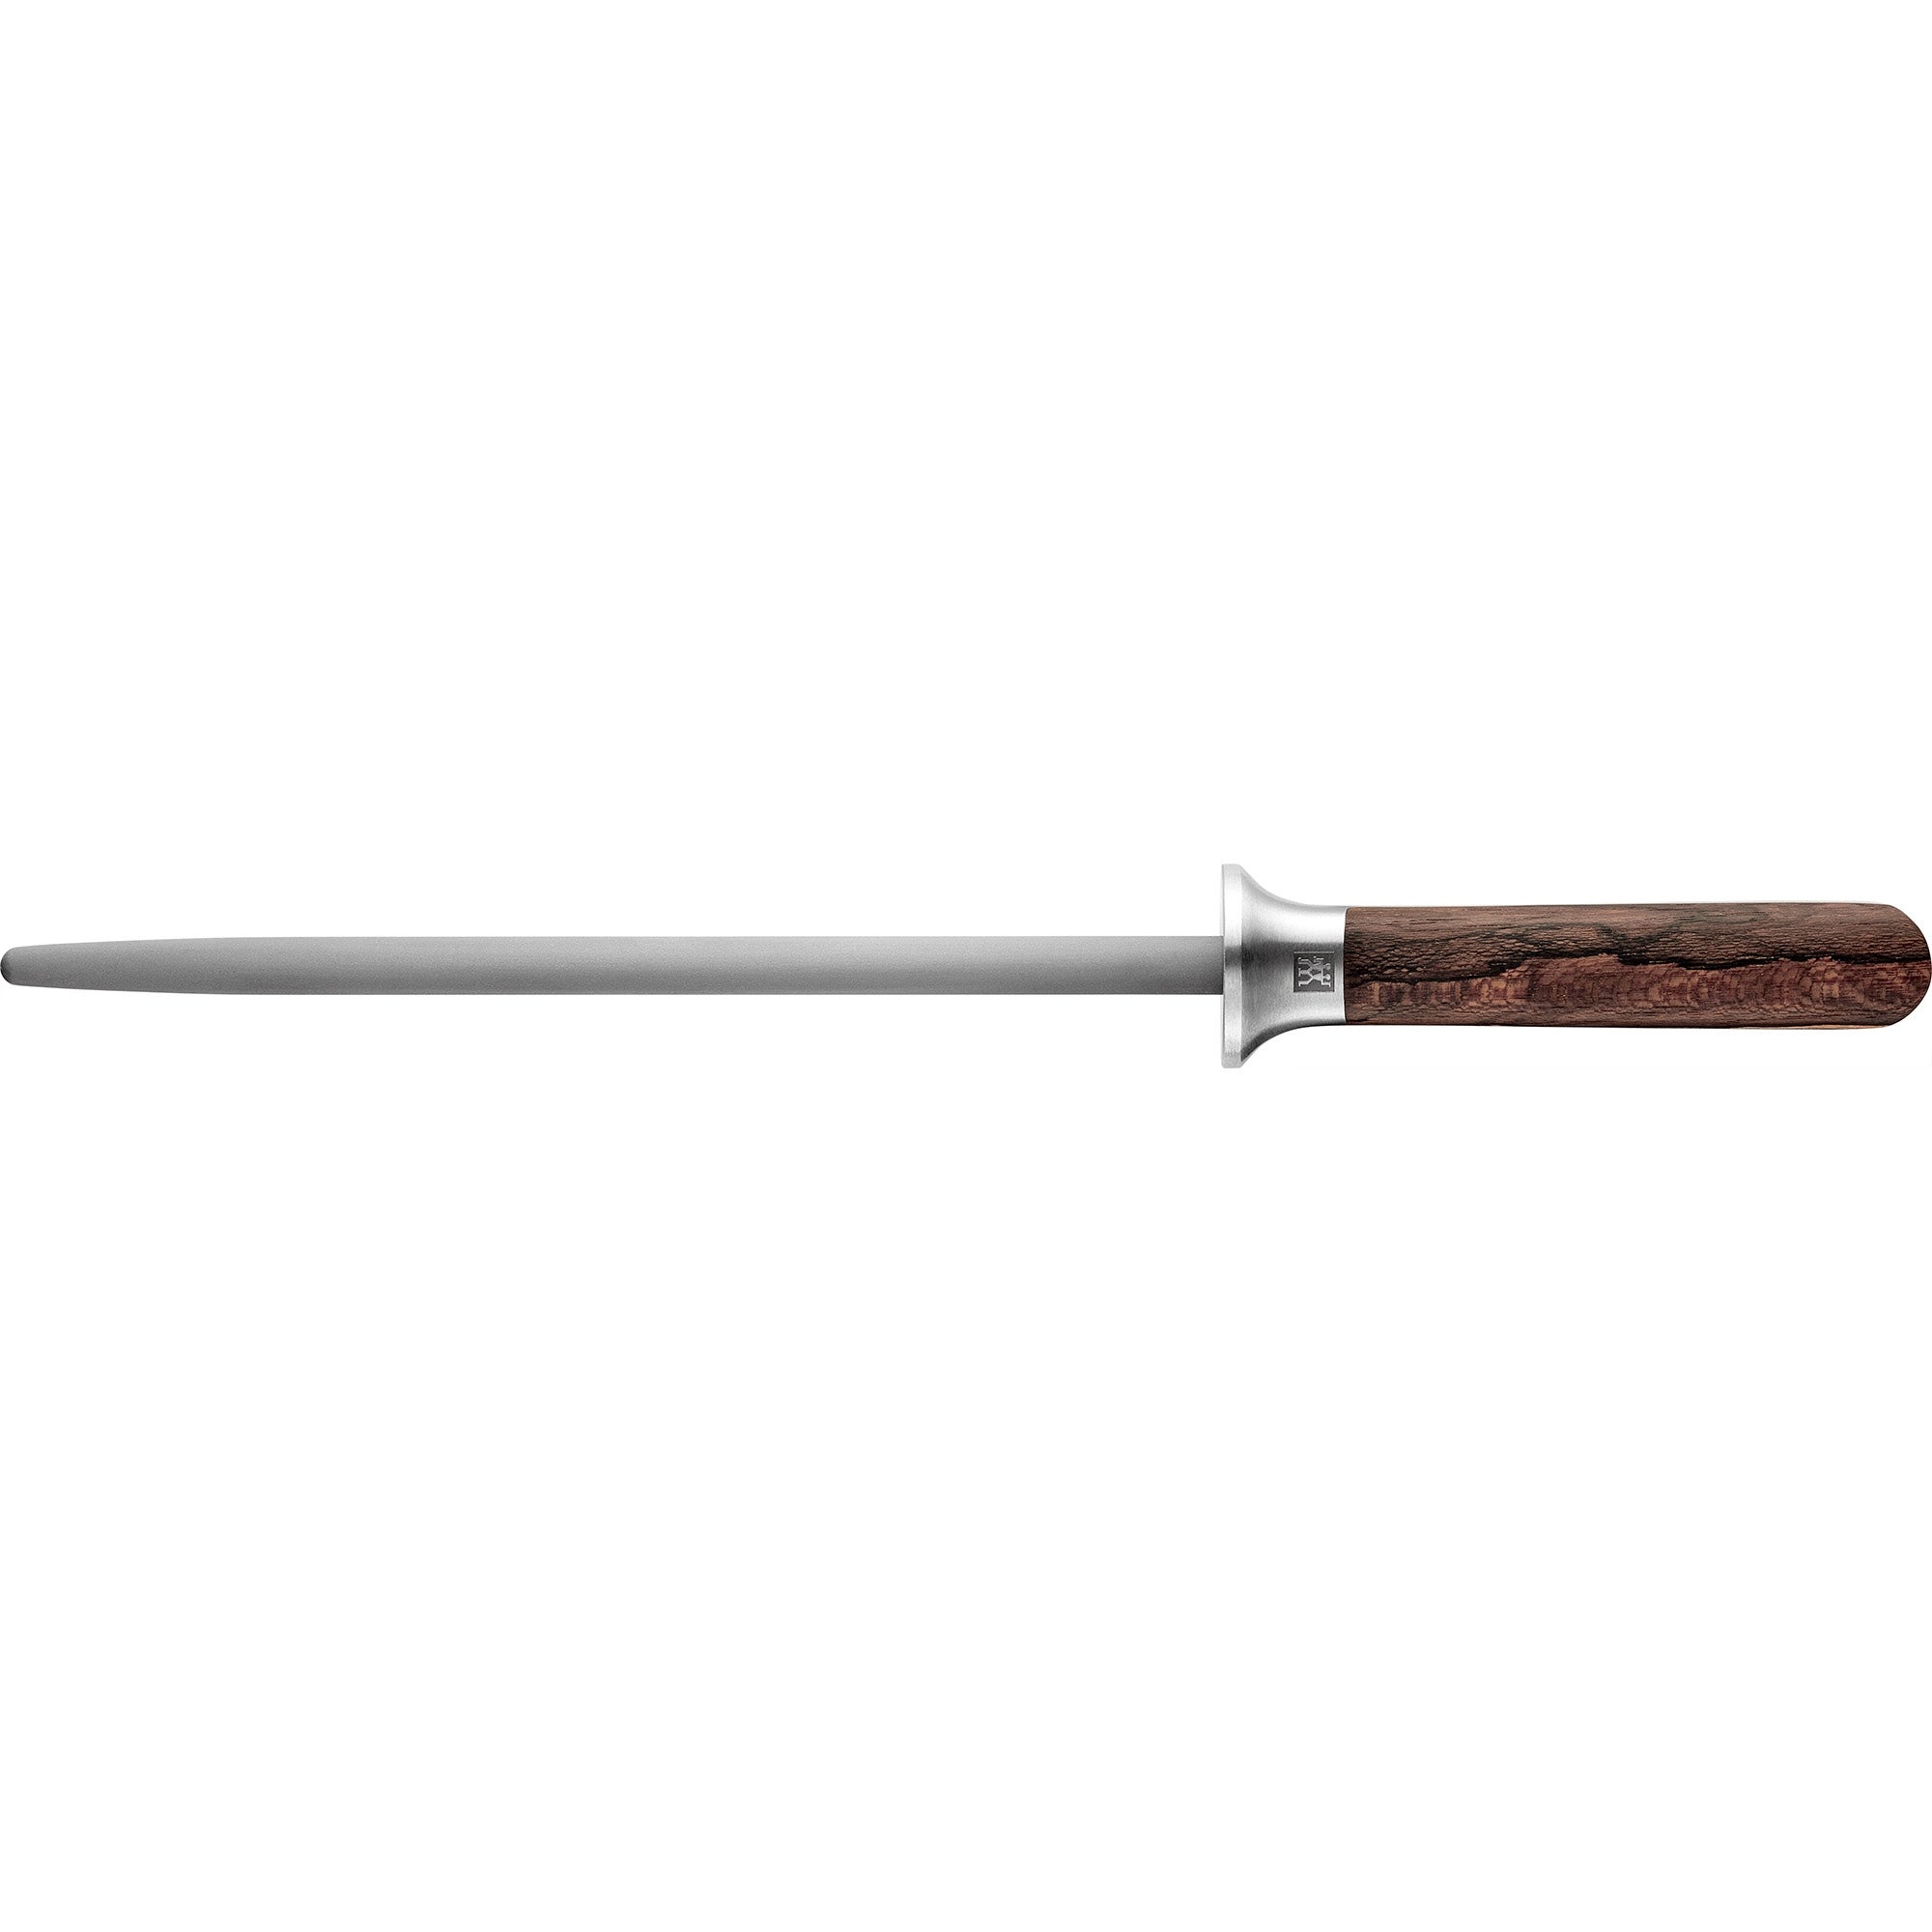 ZWILLING TWIN 1731 9-inch Sharpening Steel - Brown